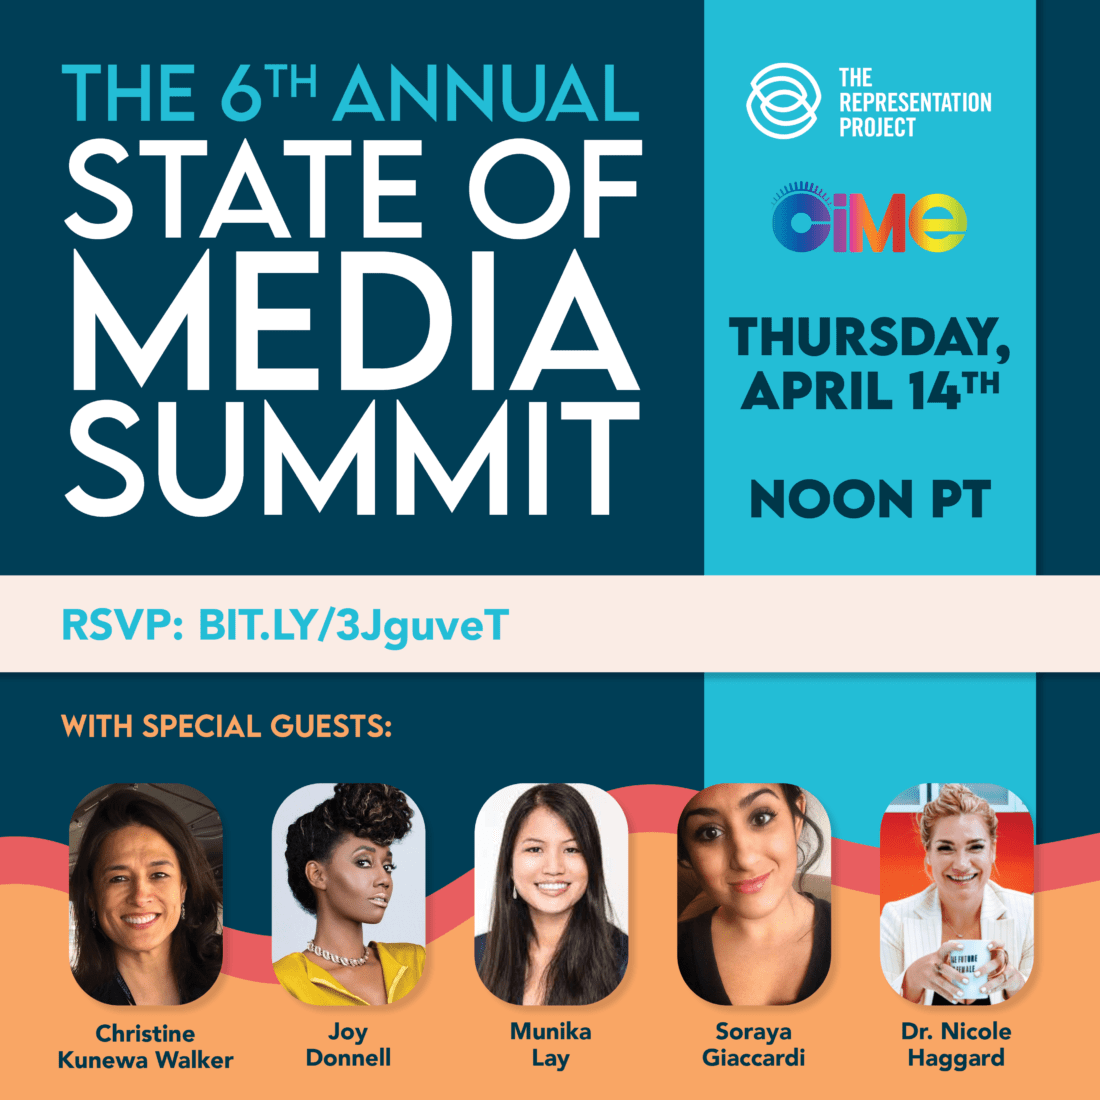 Flyer for 6th Annual State of Media Summit